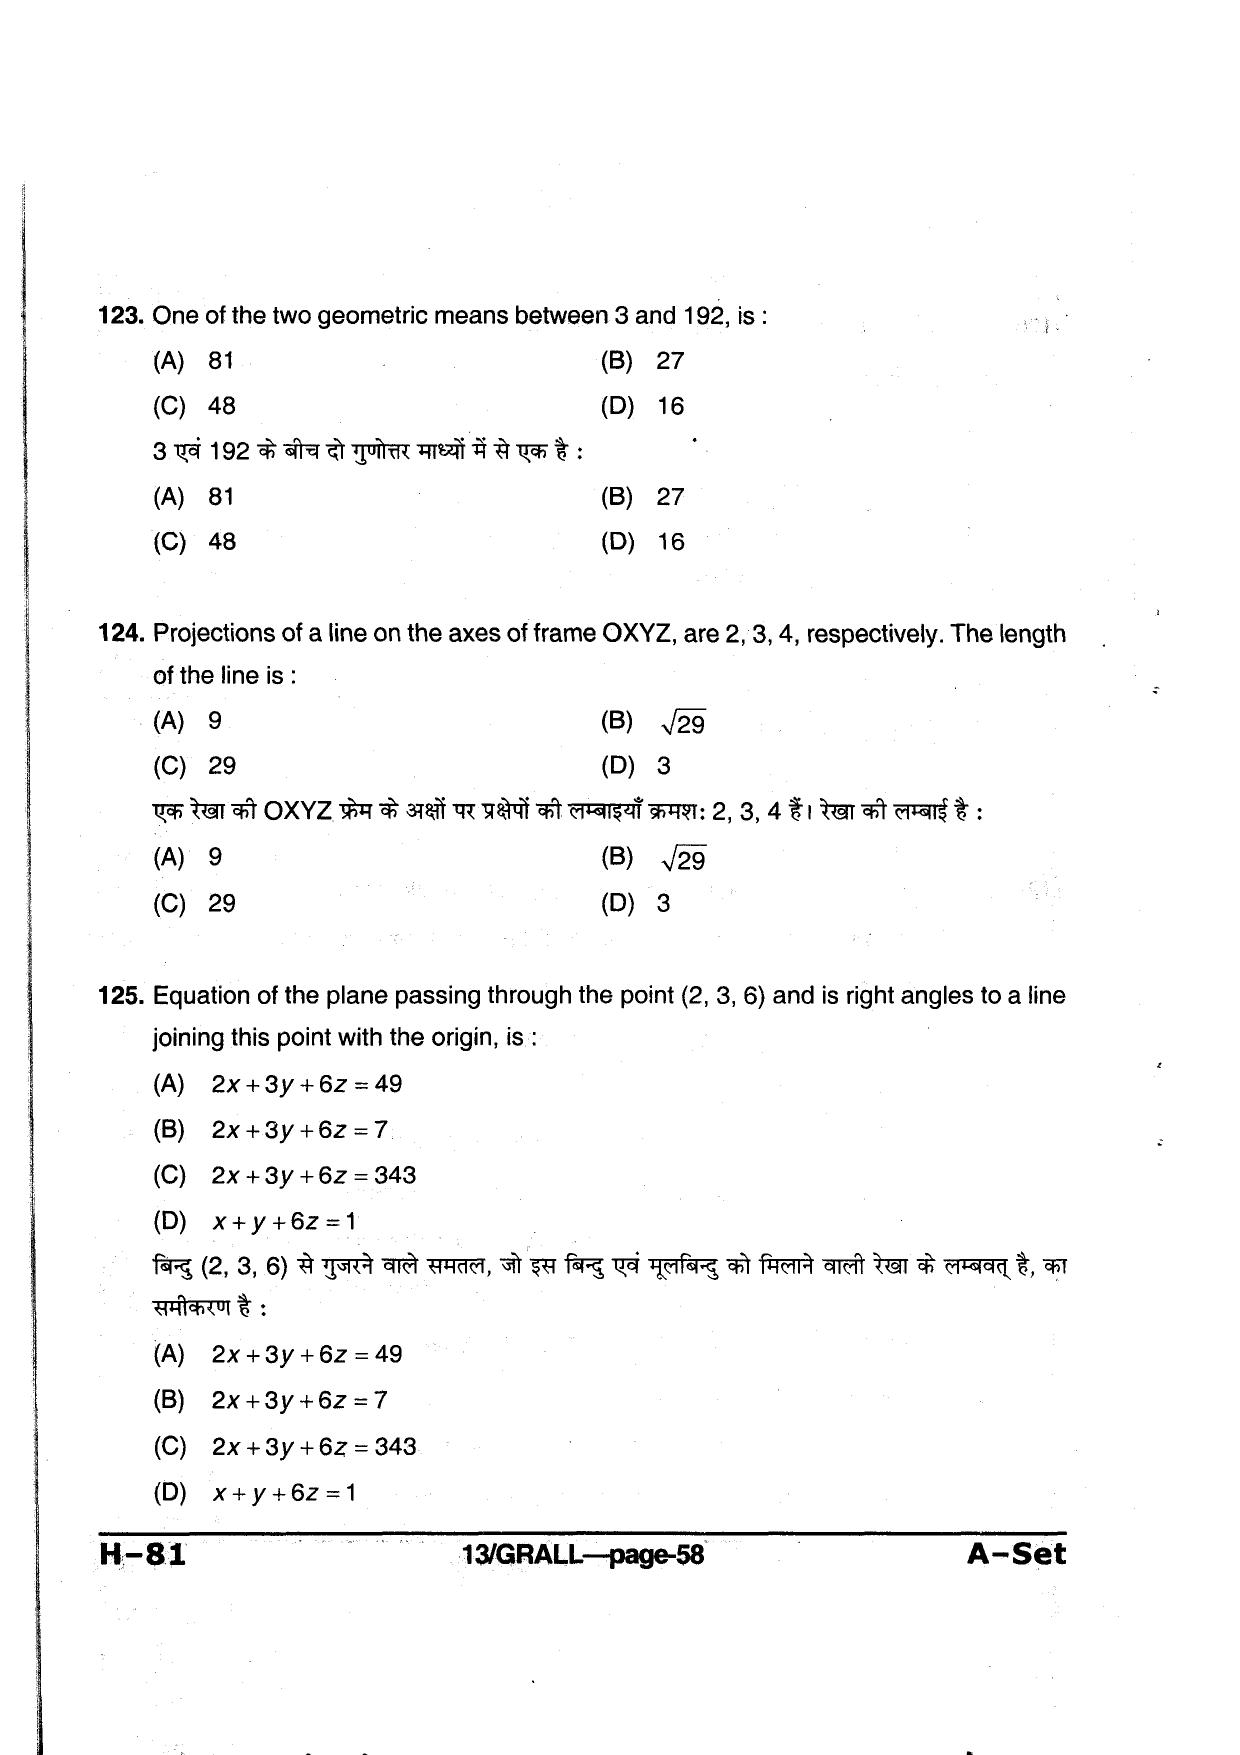 MP PAT 2013 Question Paper - Paper I - Page 58